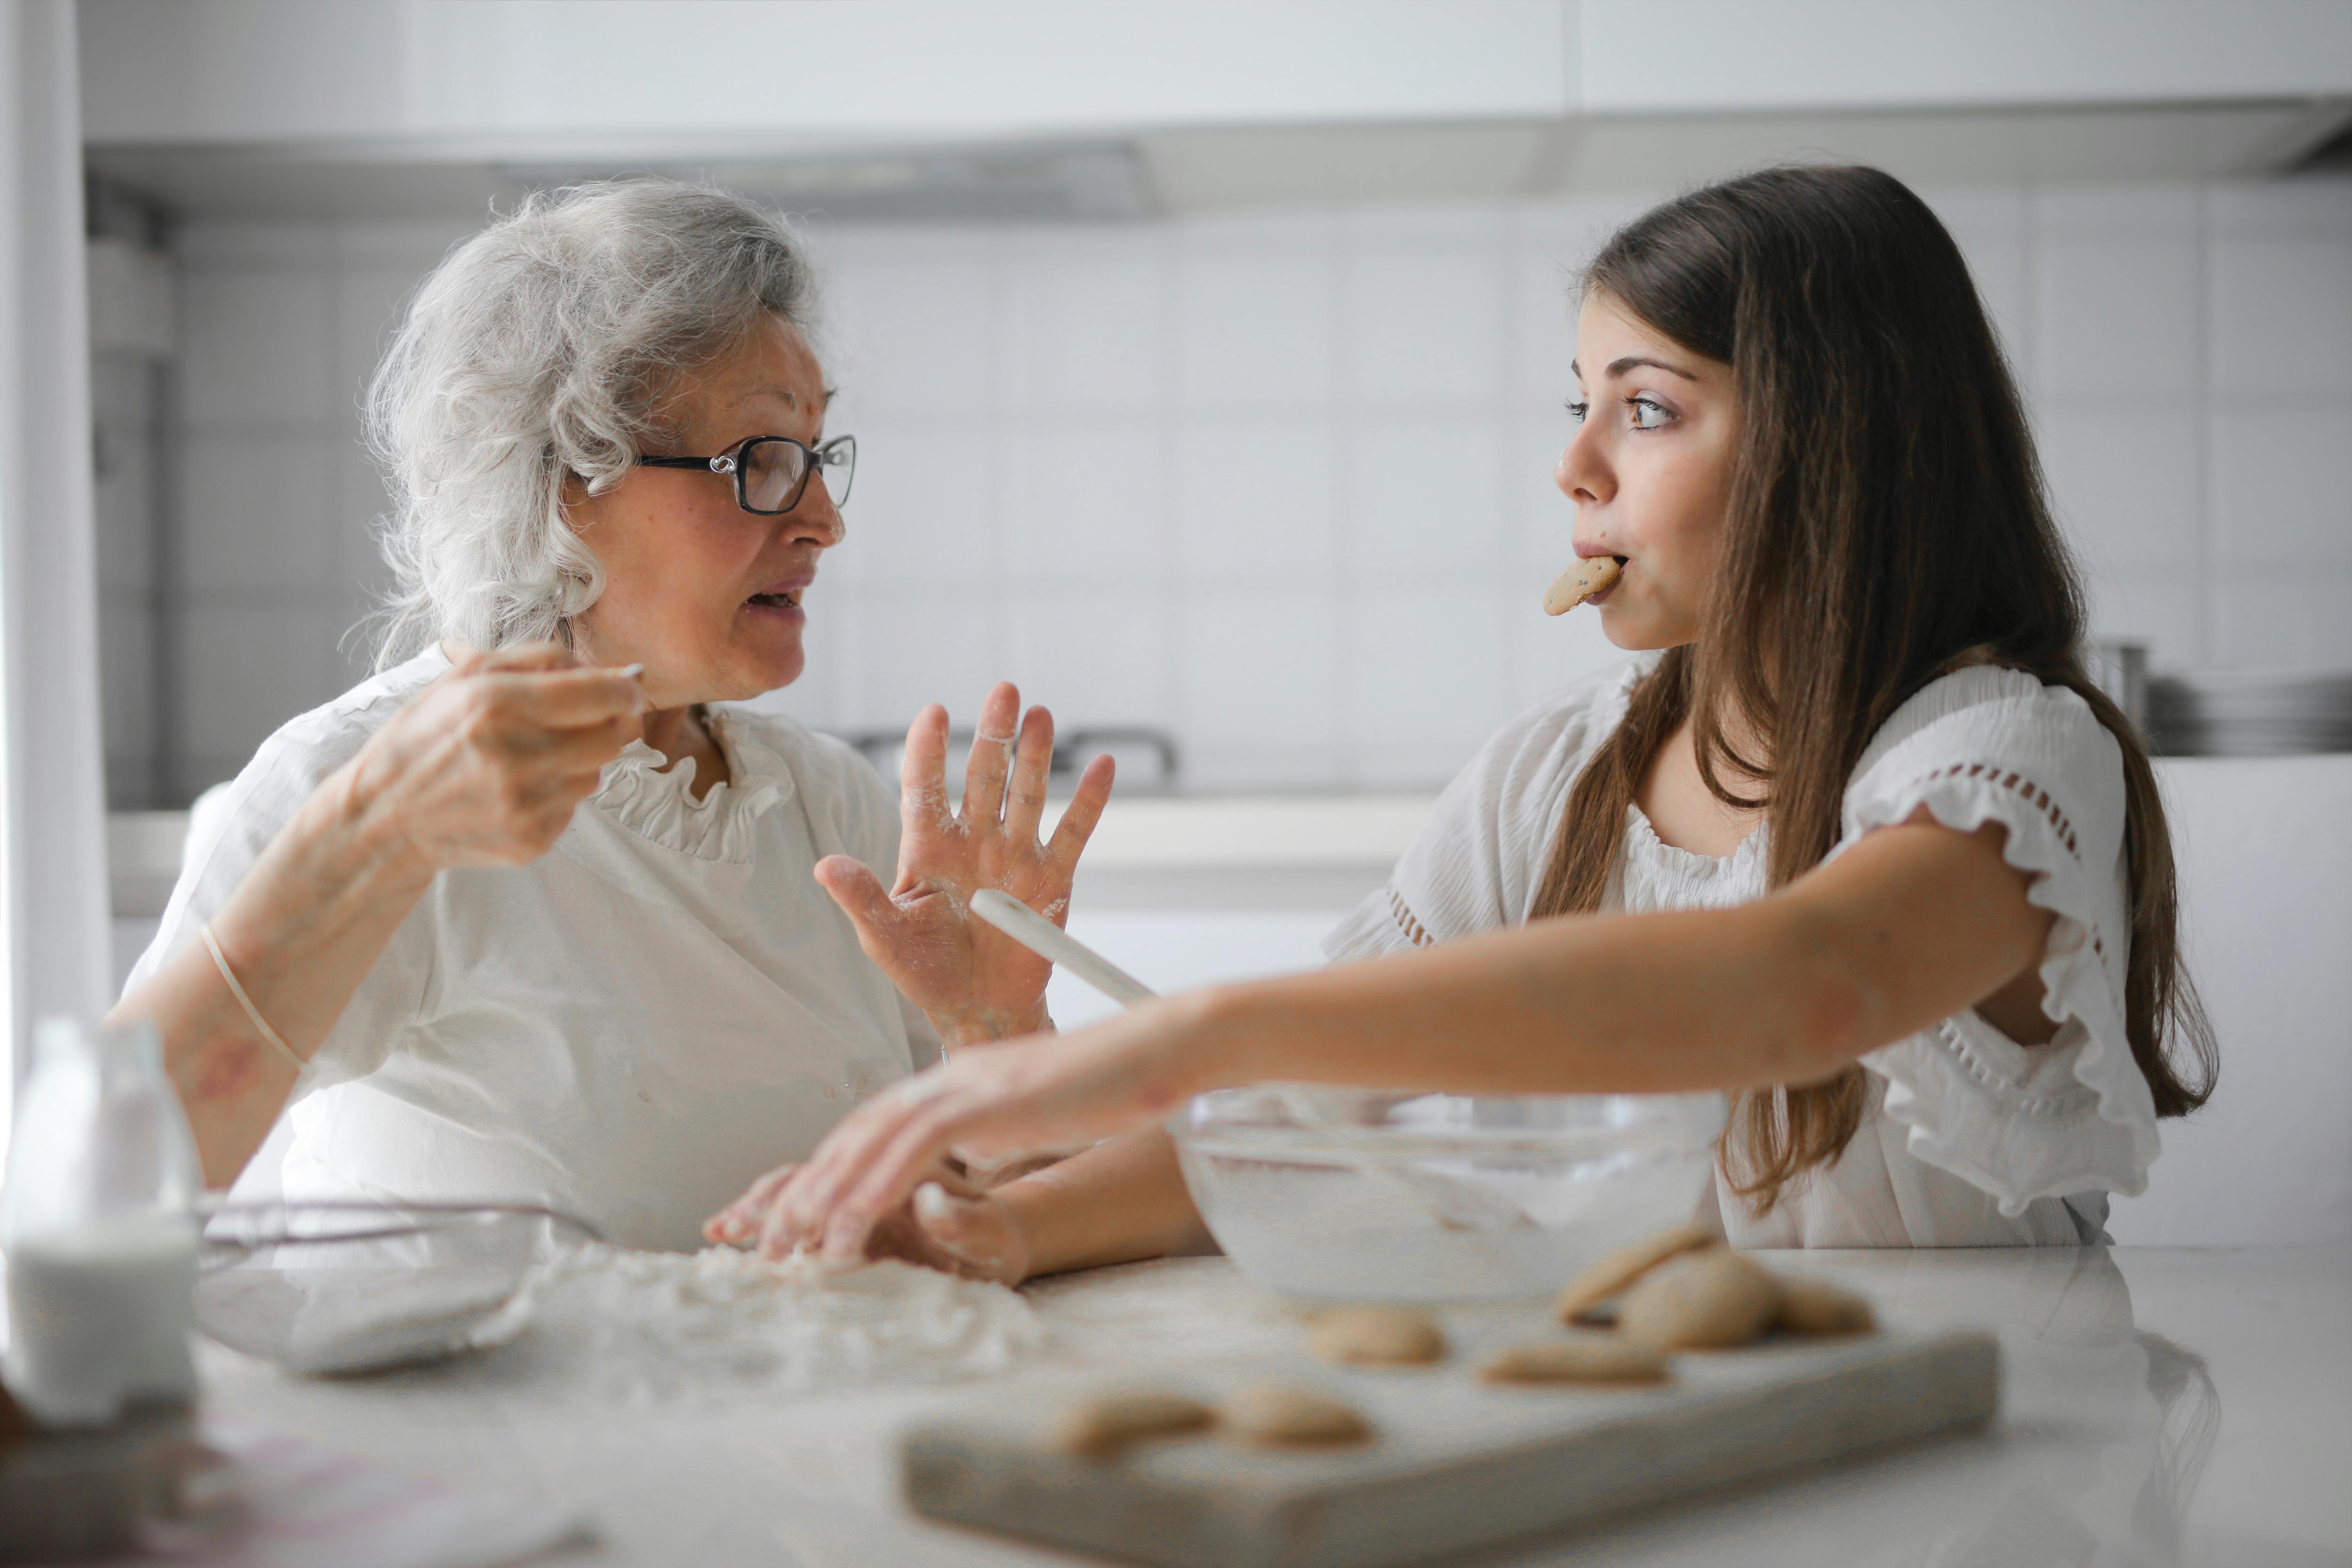 Pensive grandmother and granddaughter having a conversation in the kitchen | Source: Pexels